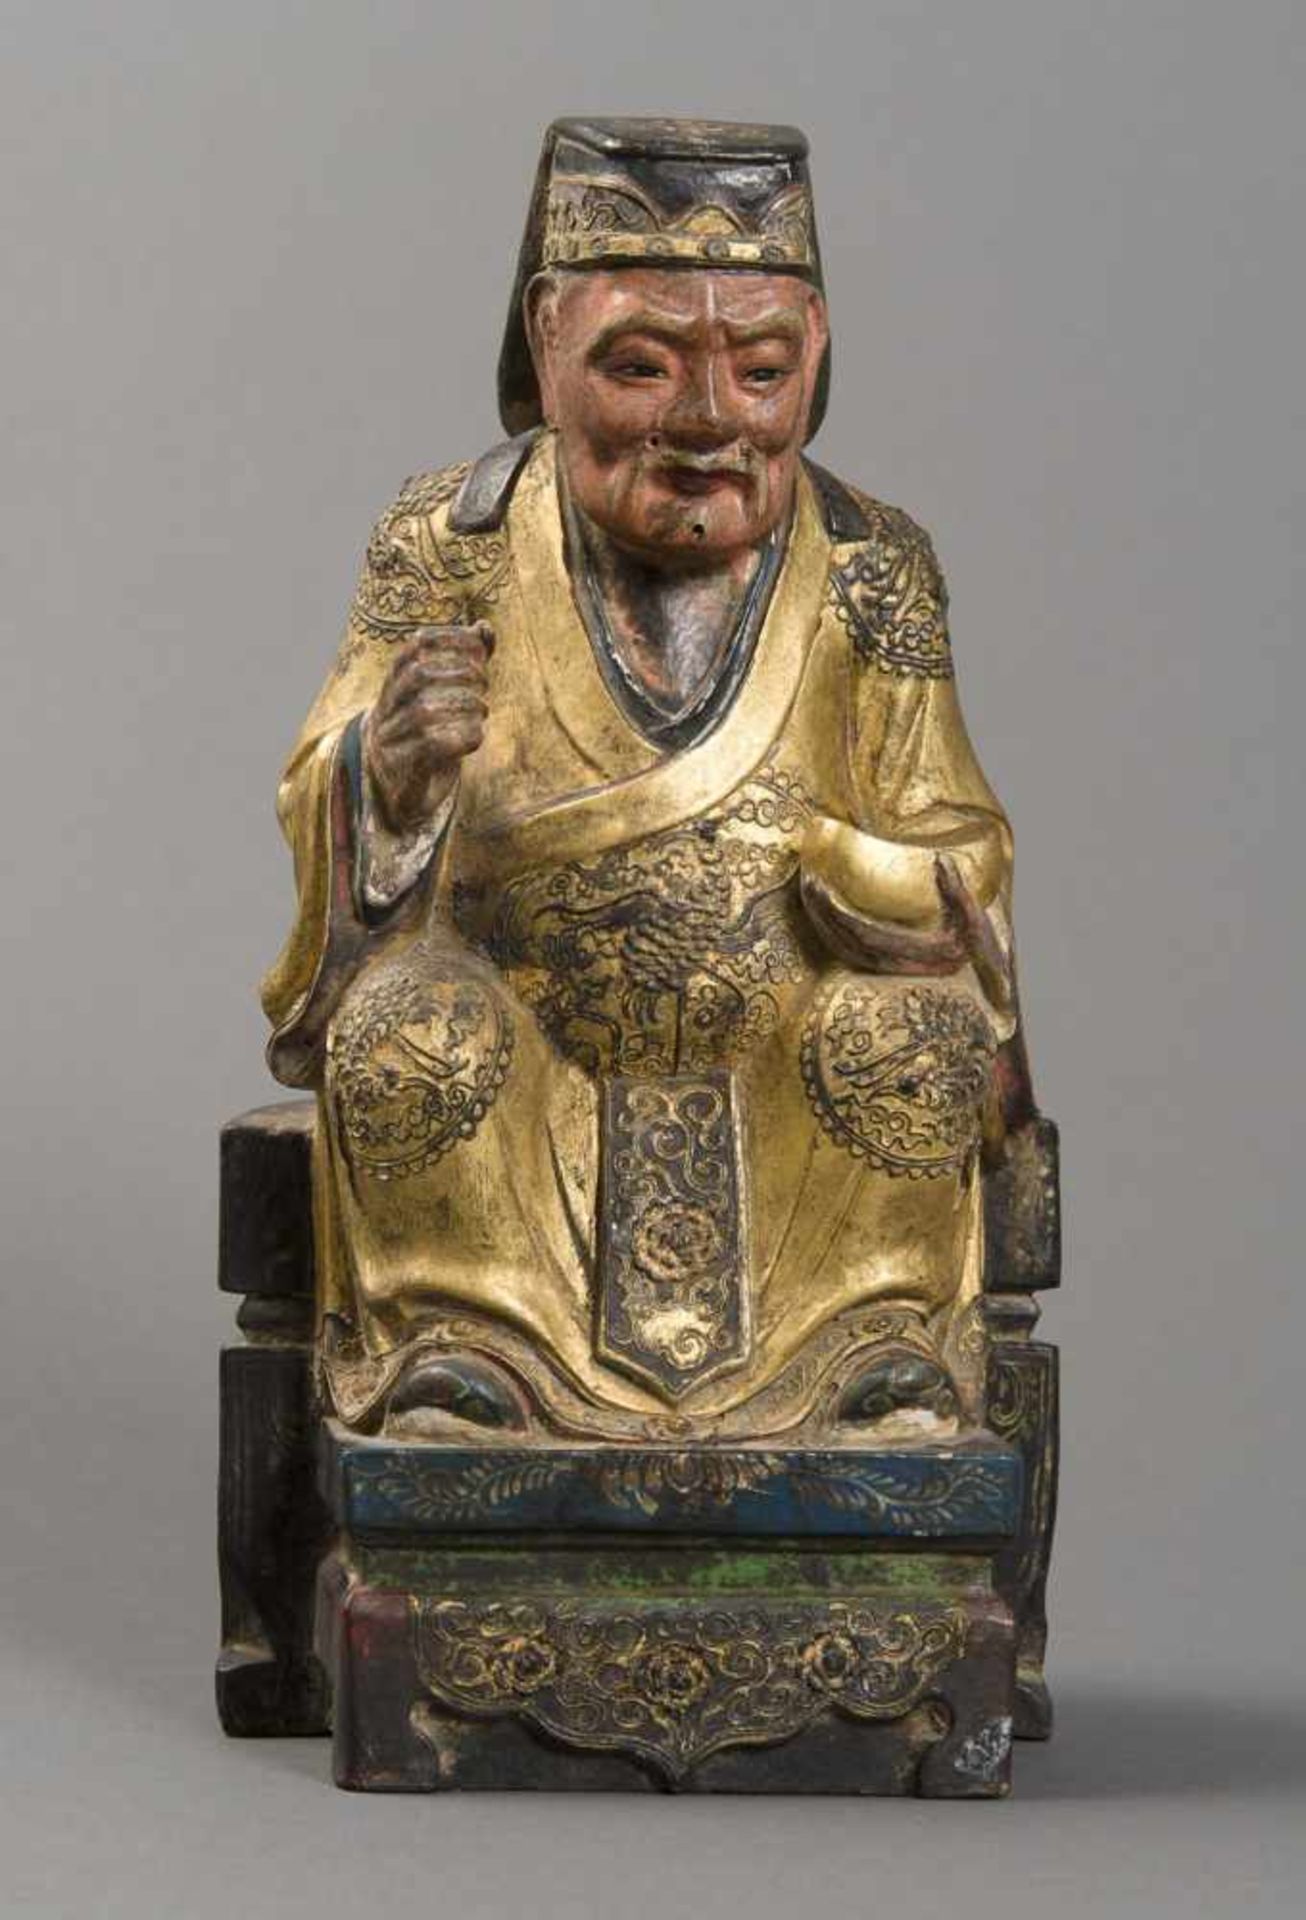 IMPERIAL DIGNITARY ON A THRONE Wood with gilding. China, Qing-dynasty (1644-1911) Tiered throne with